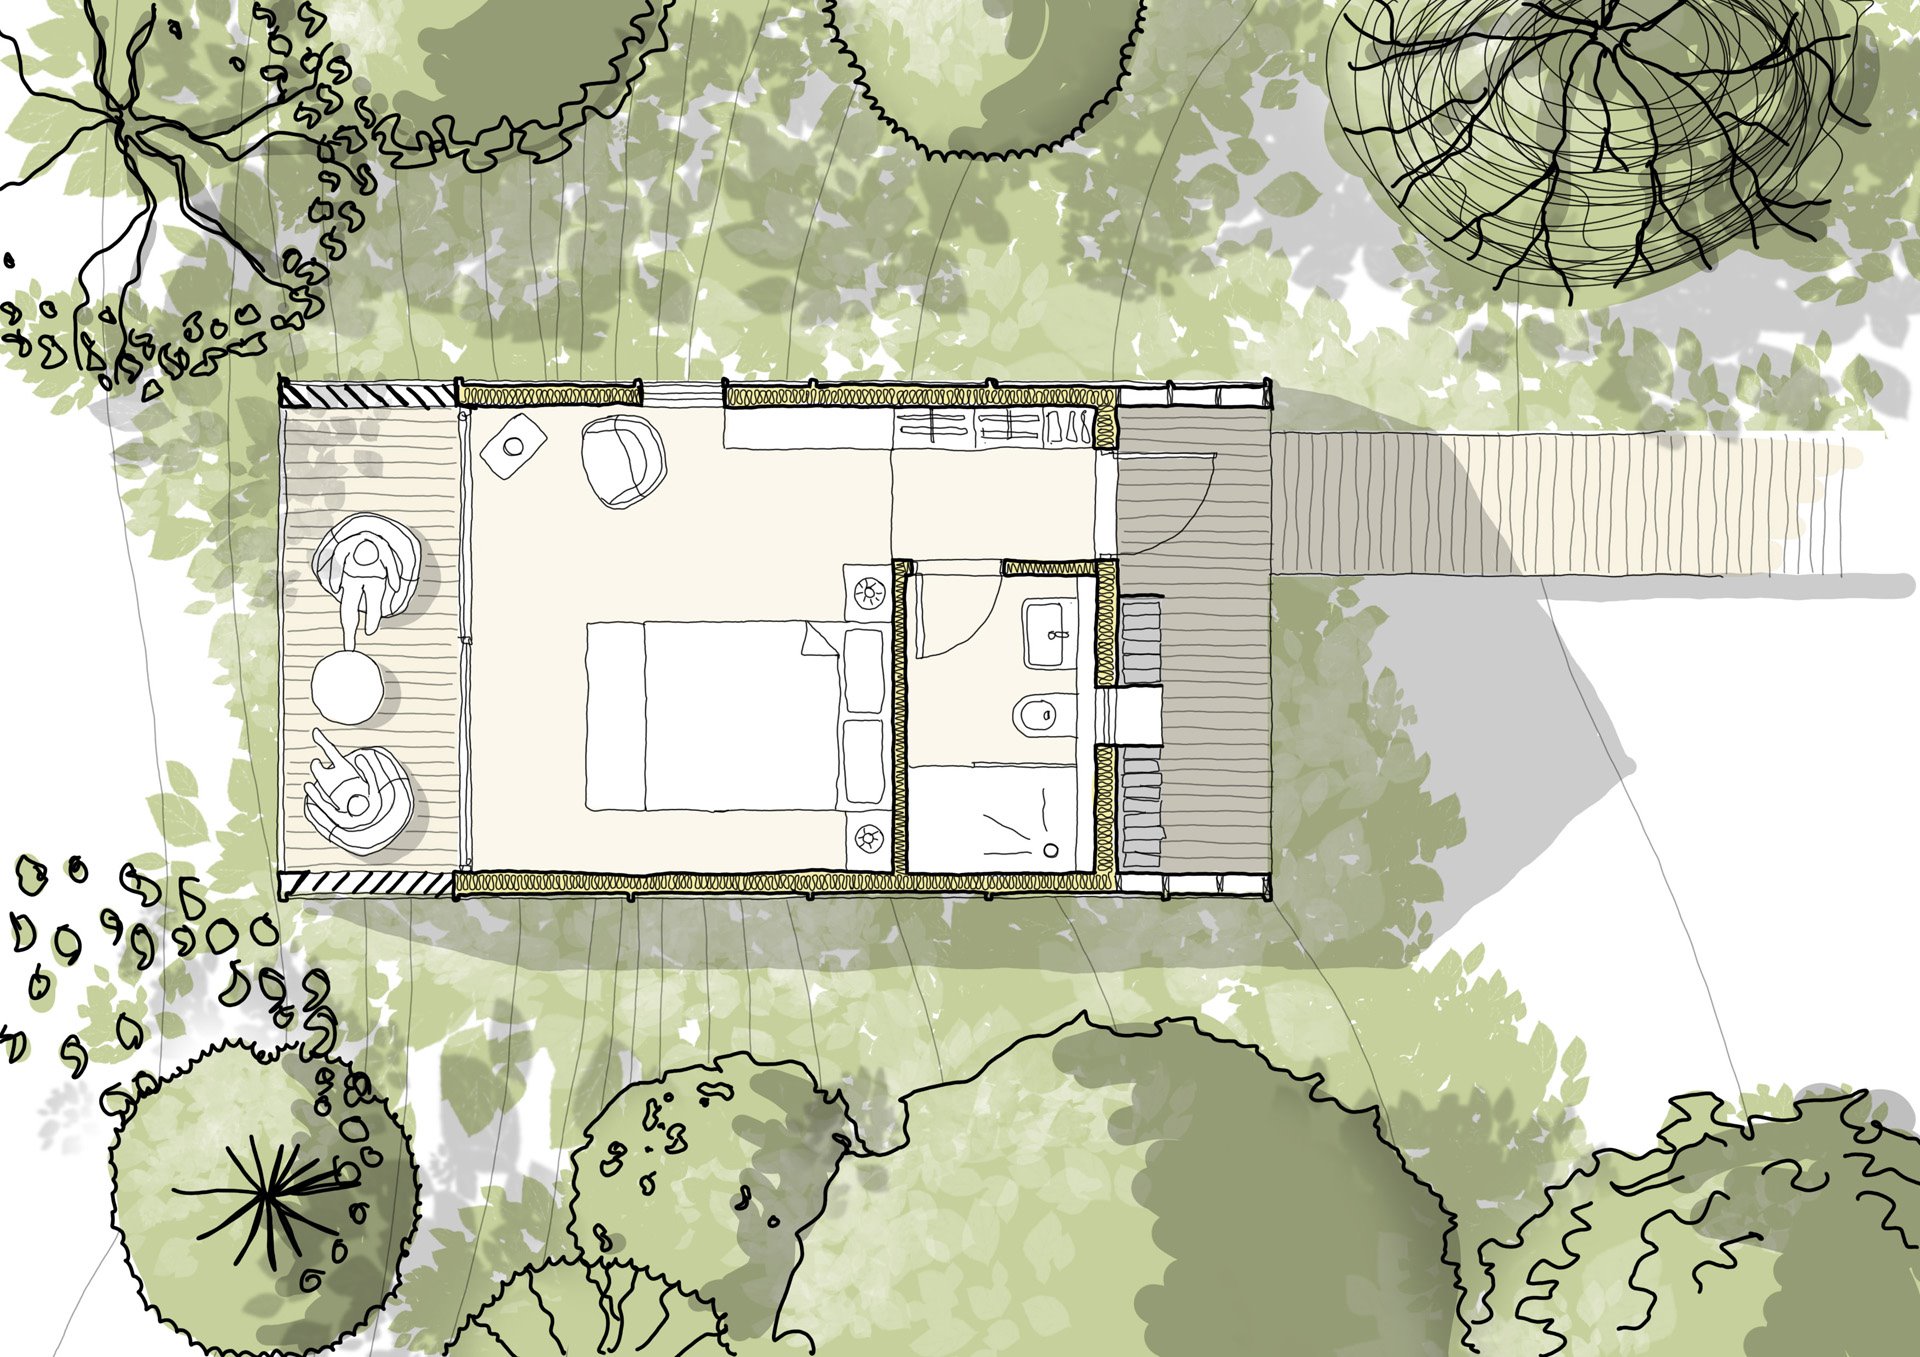 Treehouse plans for rewilding project and wild camping at Elmore Court in Gloucestershire UK